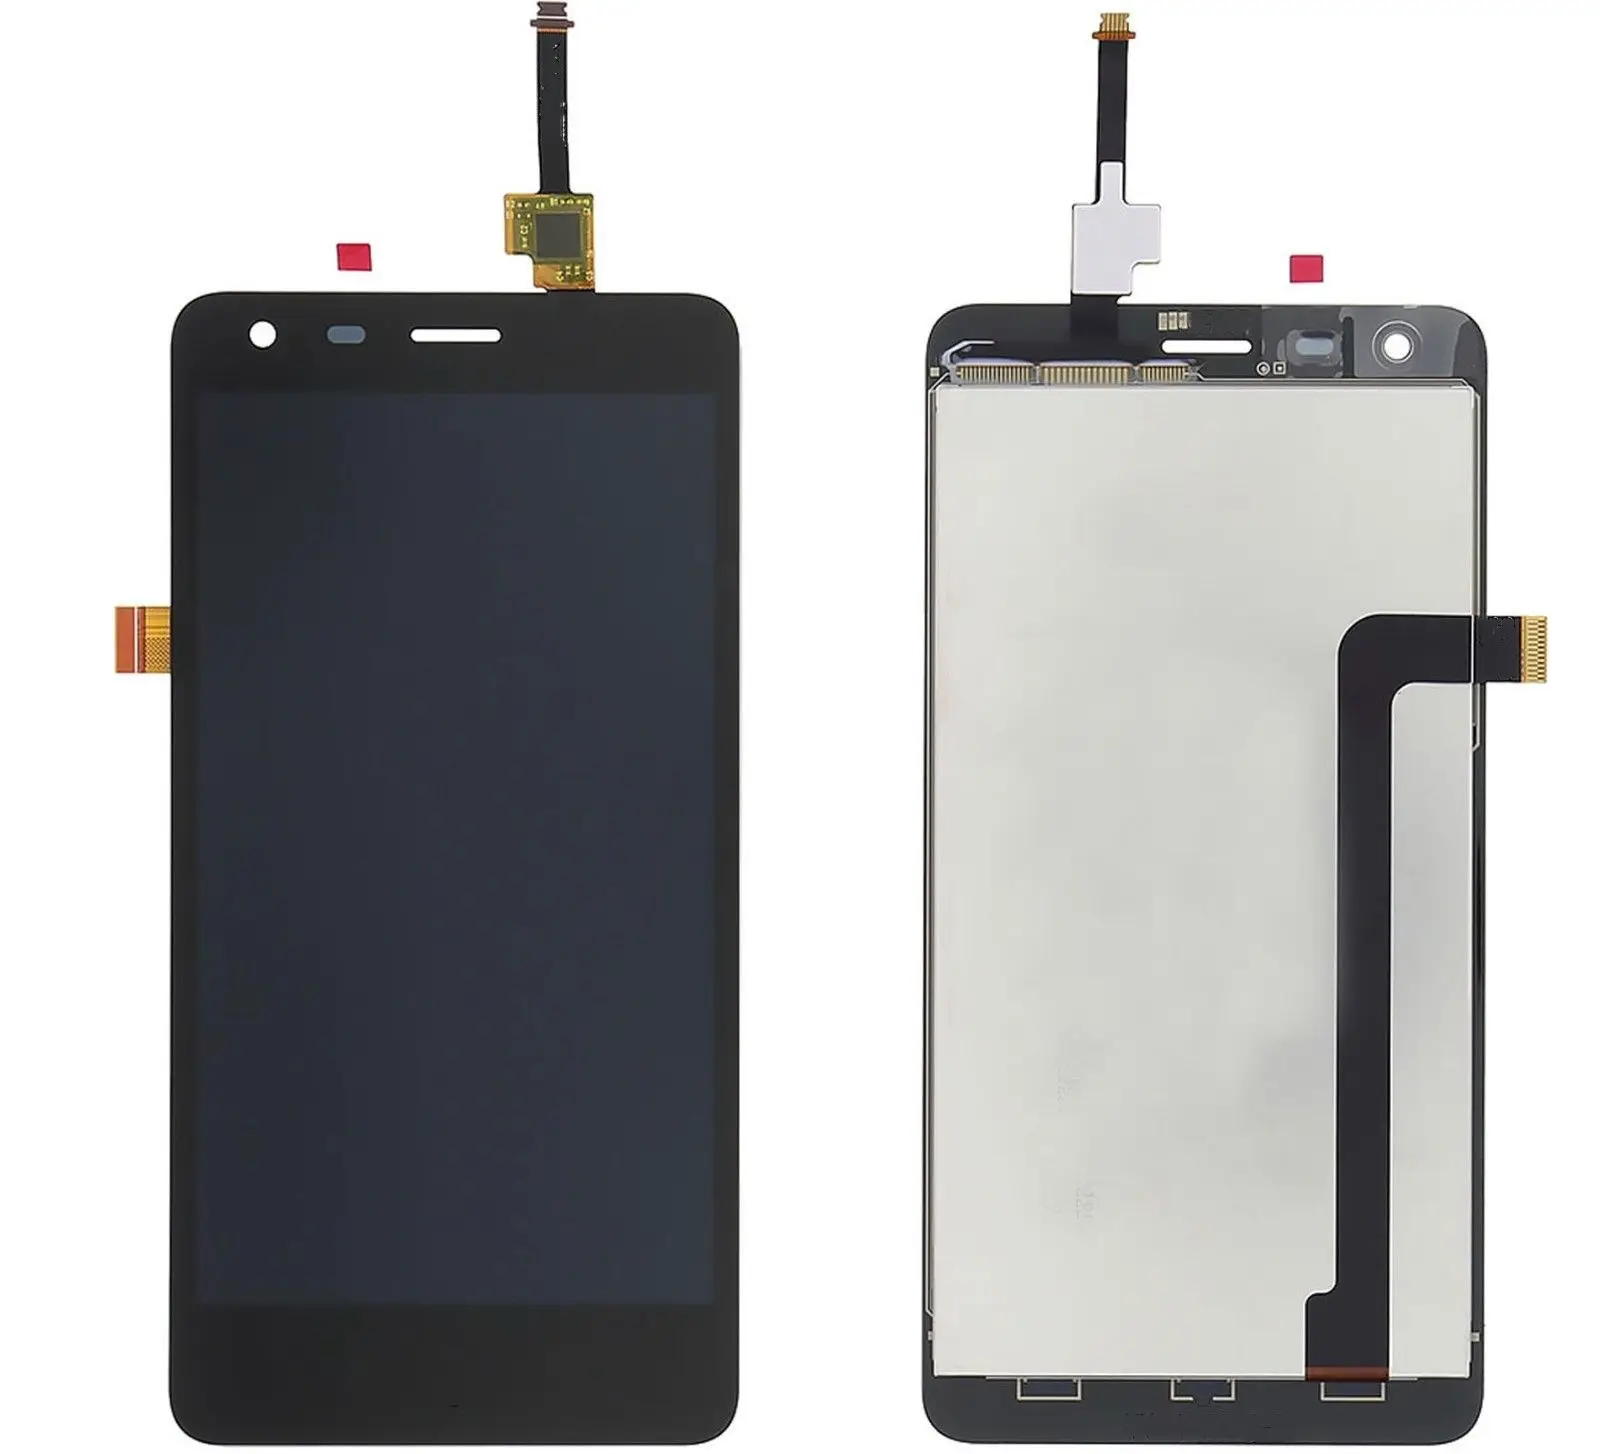 Replacement Repair Parts LCD Touch Screen Glass Panel for redmi2 with excellent quality